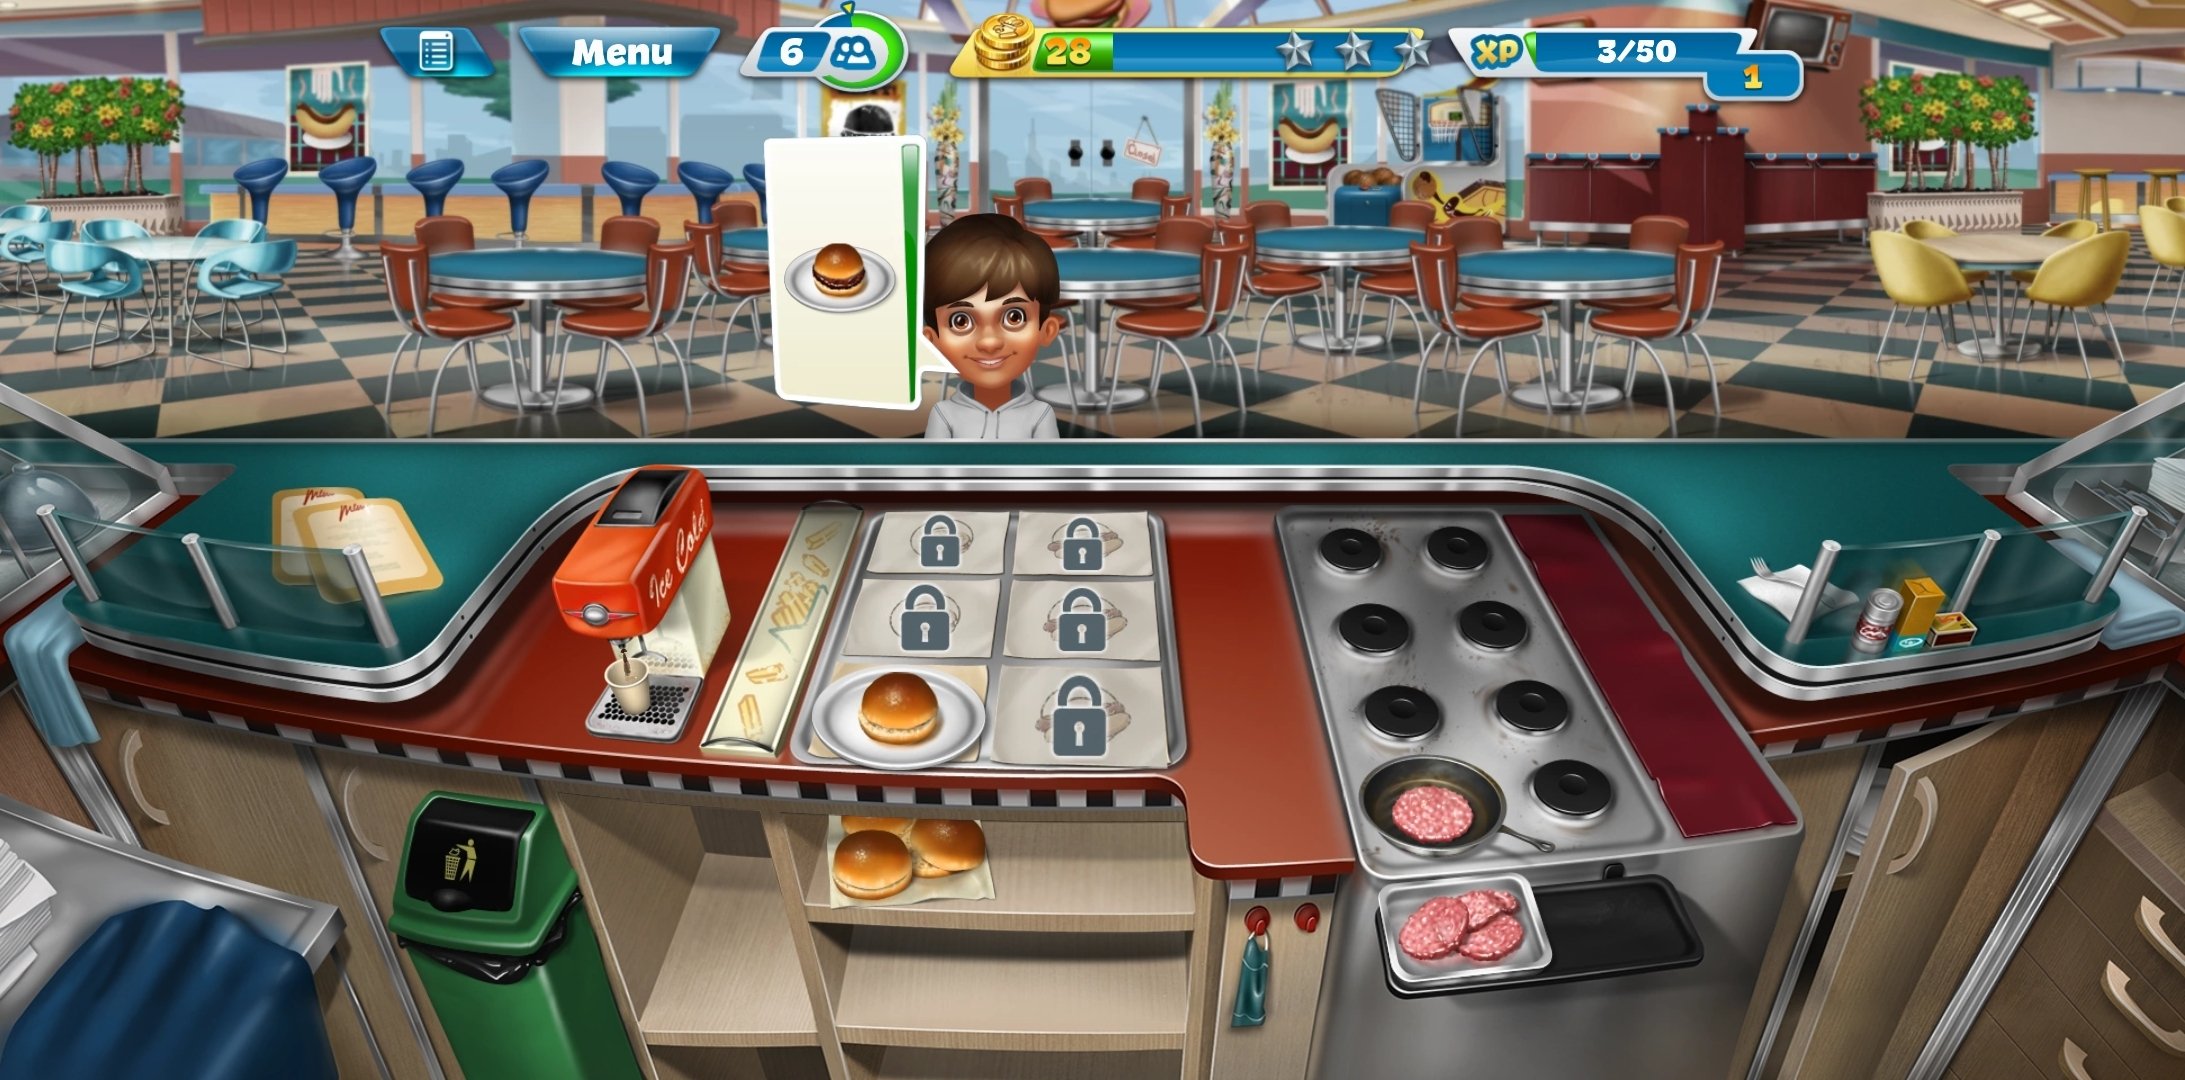 Cooking fever download unblocked